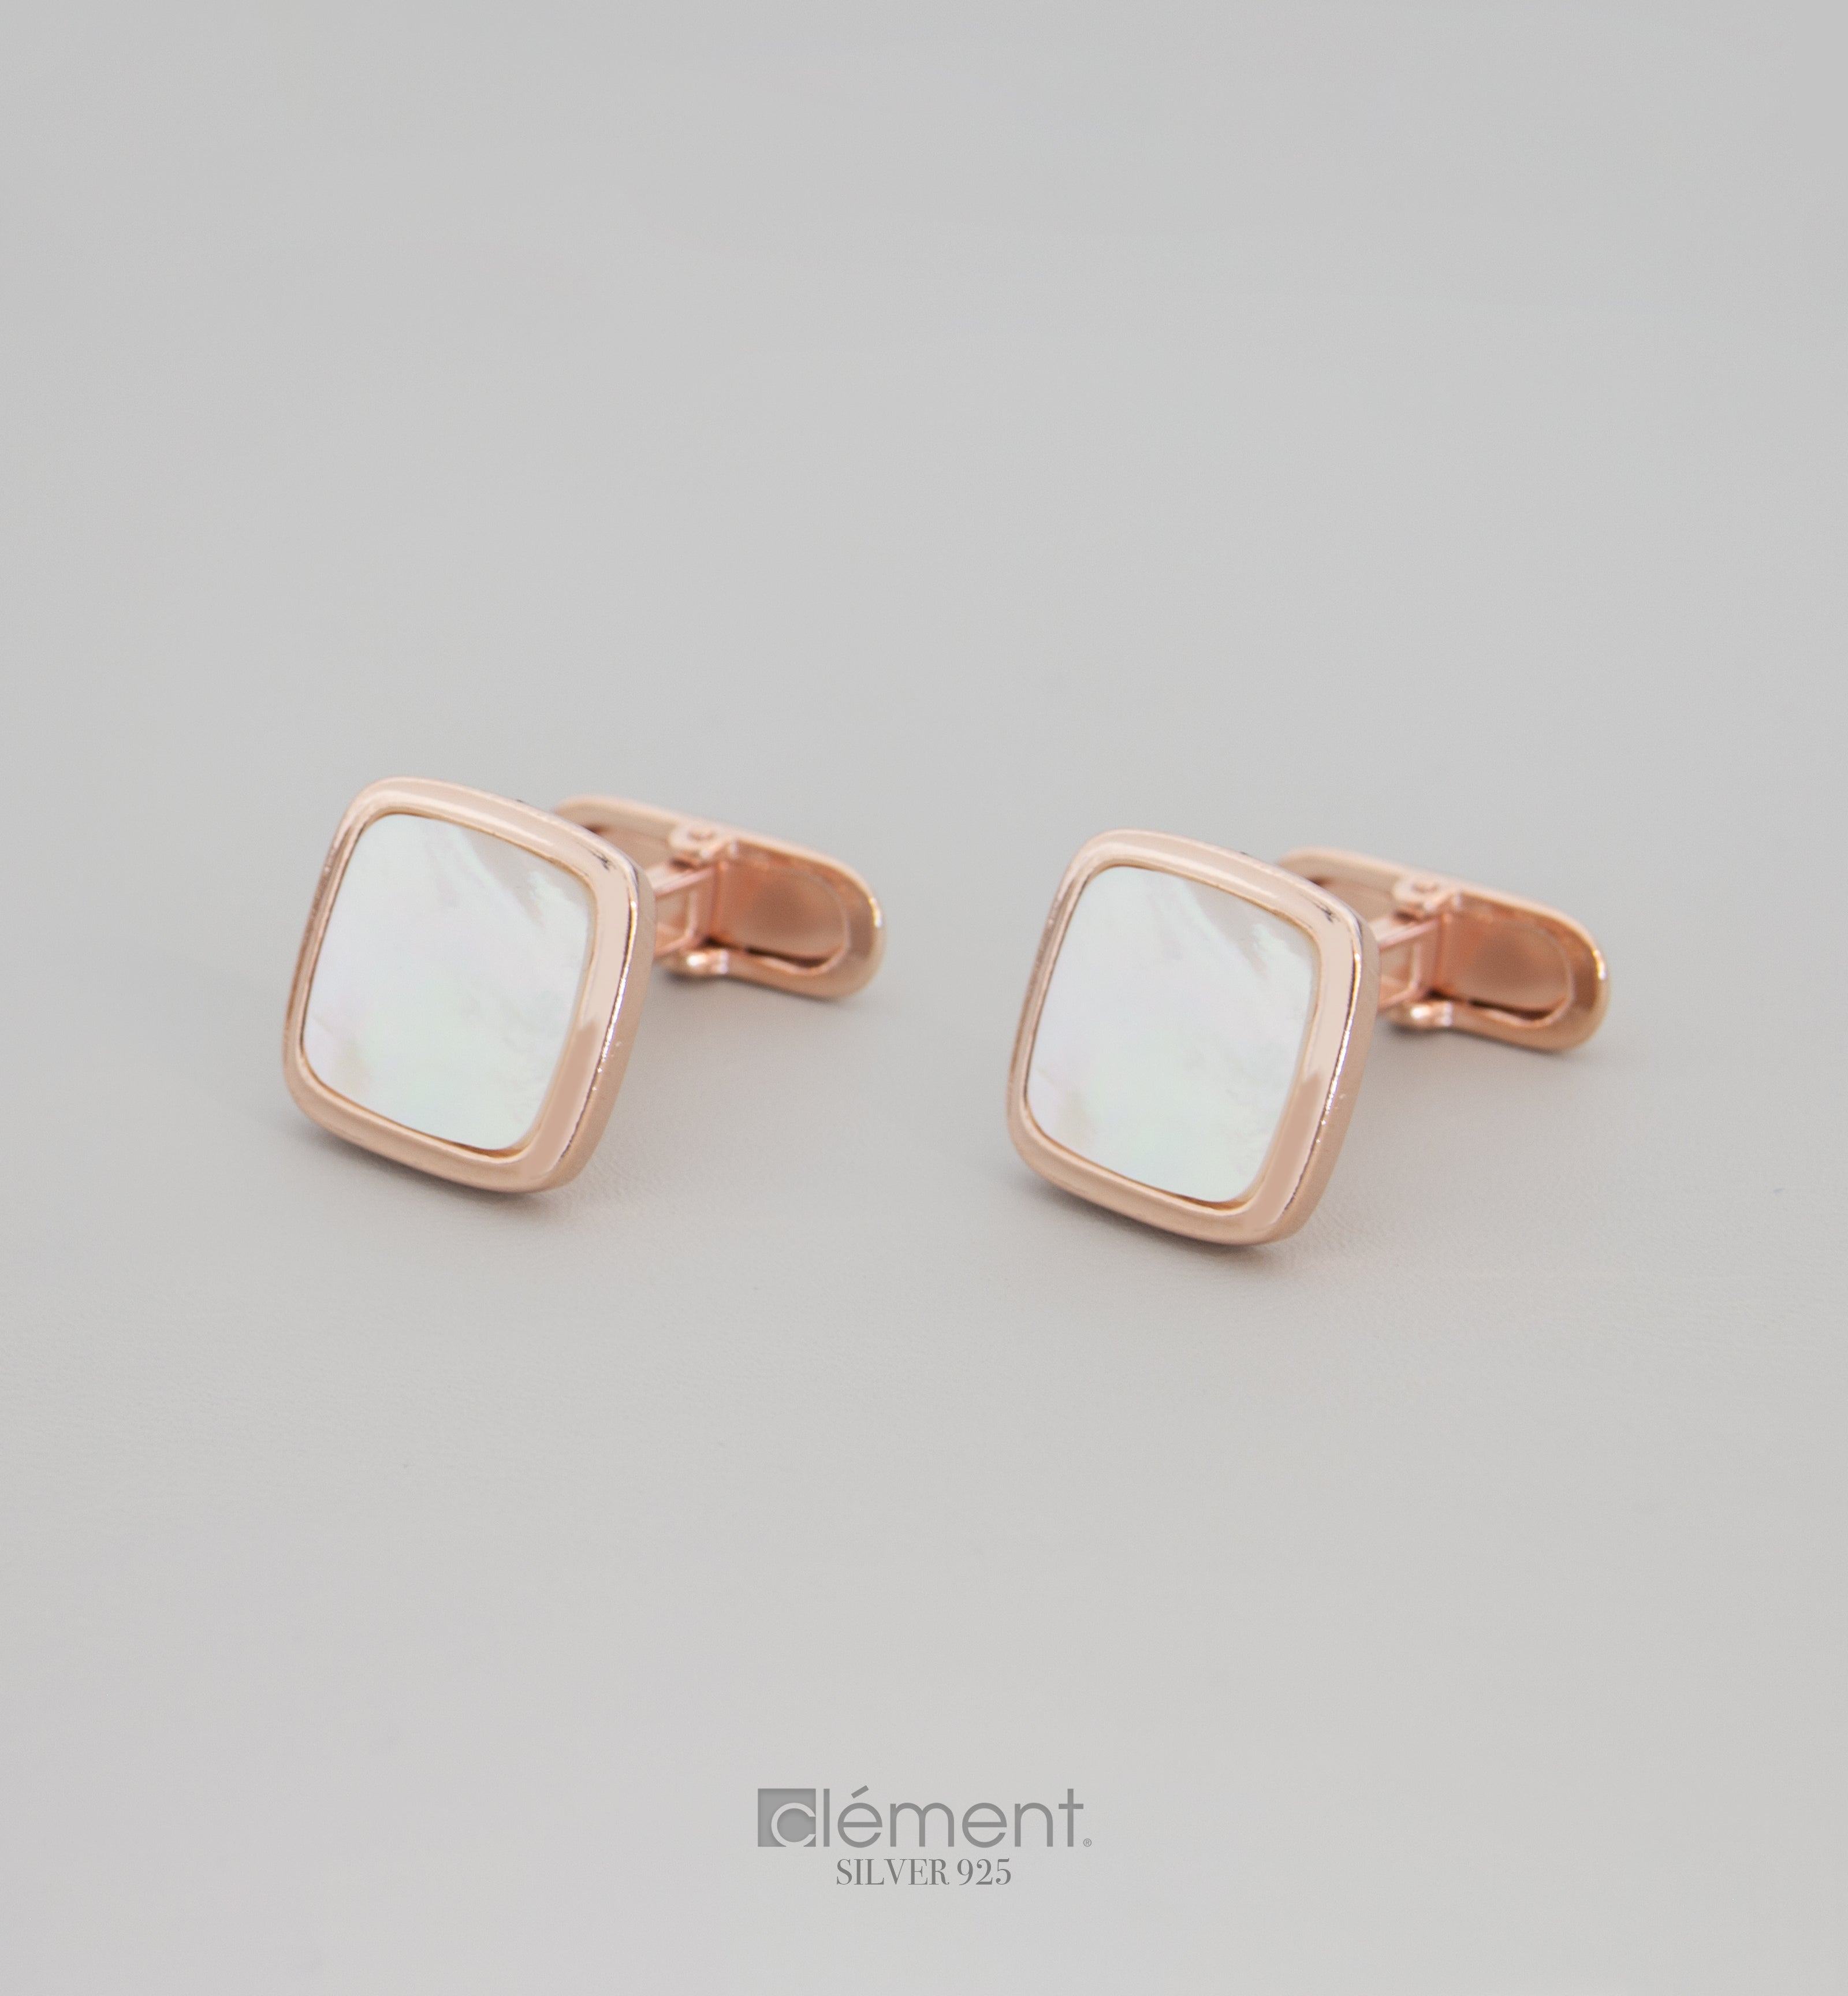 Silver 925 Square Cufflinks with Mother of Pearl